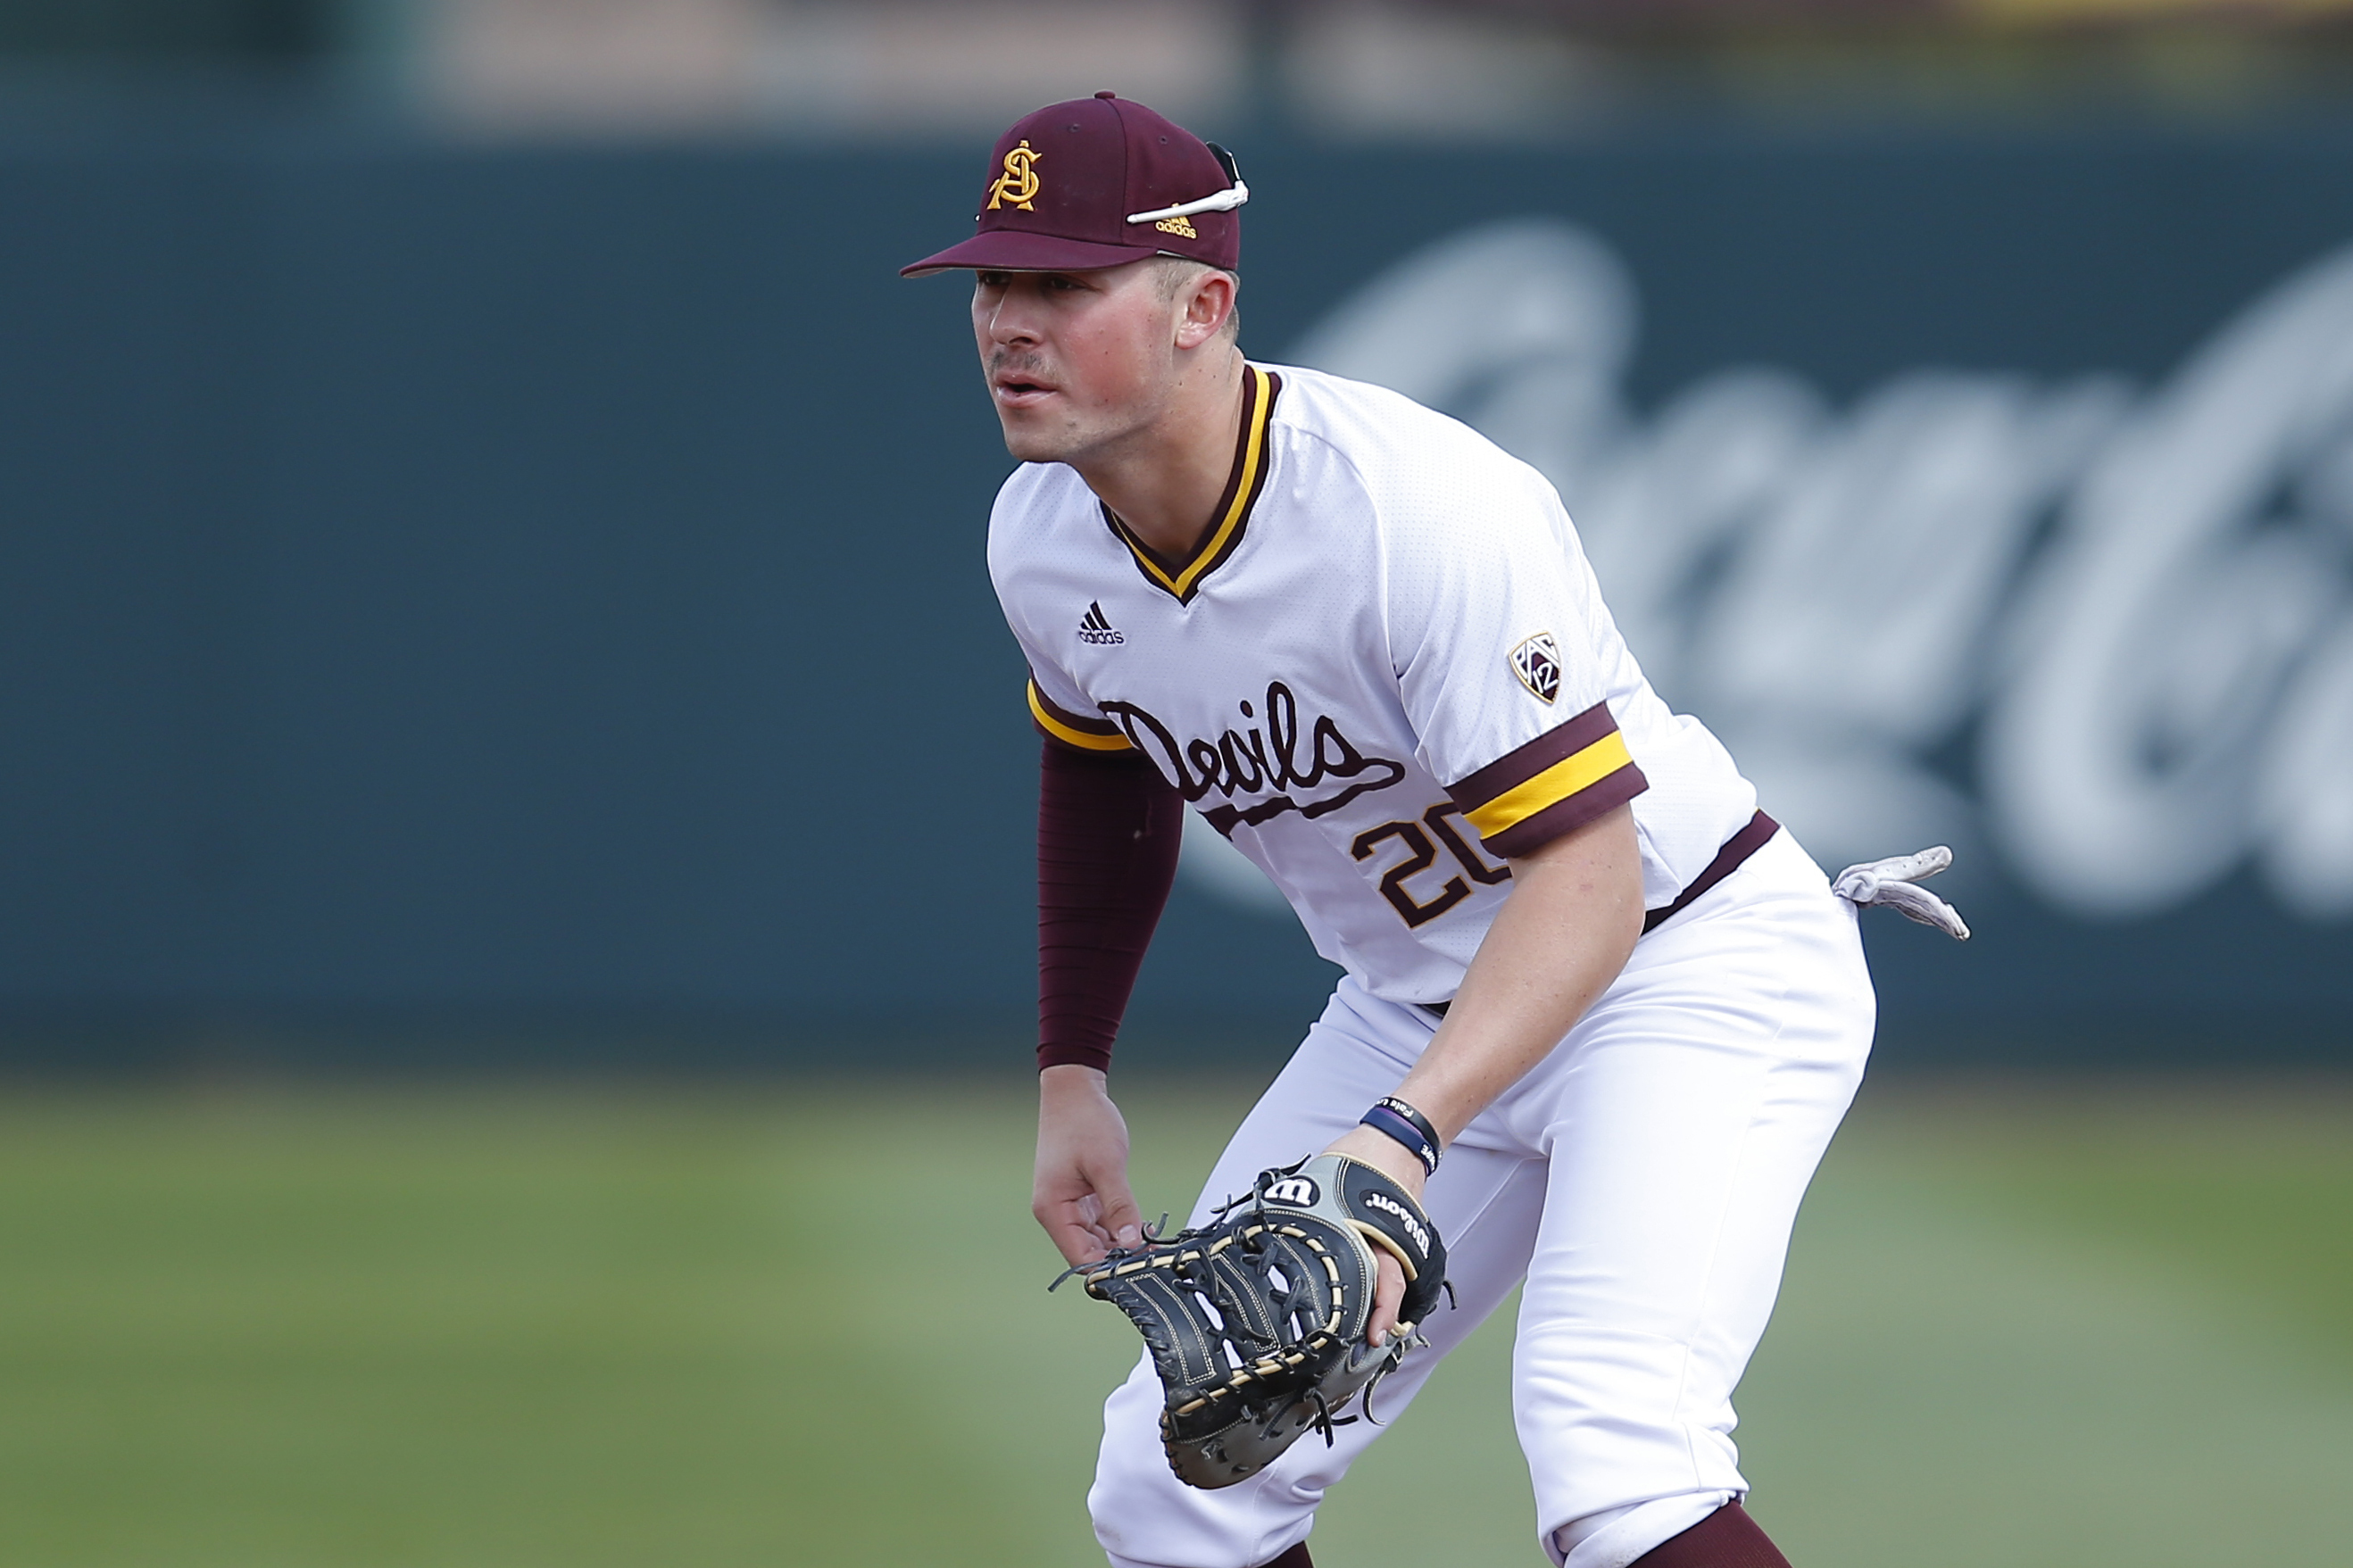 Spencer Torkelson and Top 2020 MLB Draft Prospect Scouting Reports